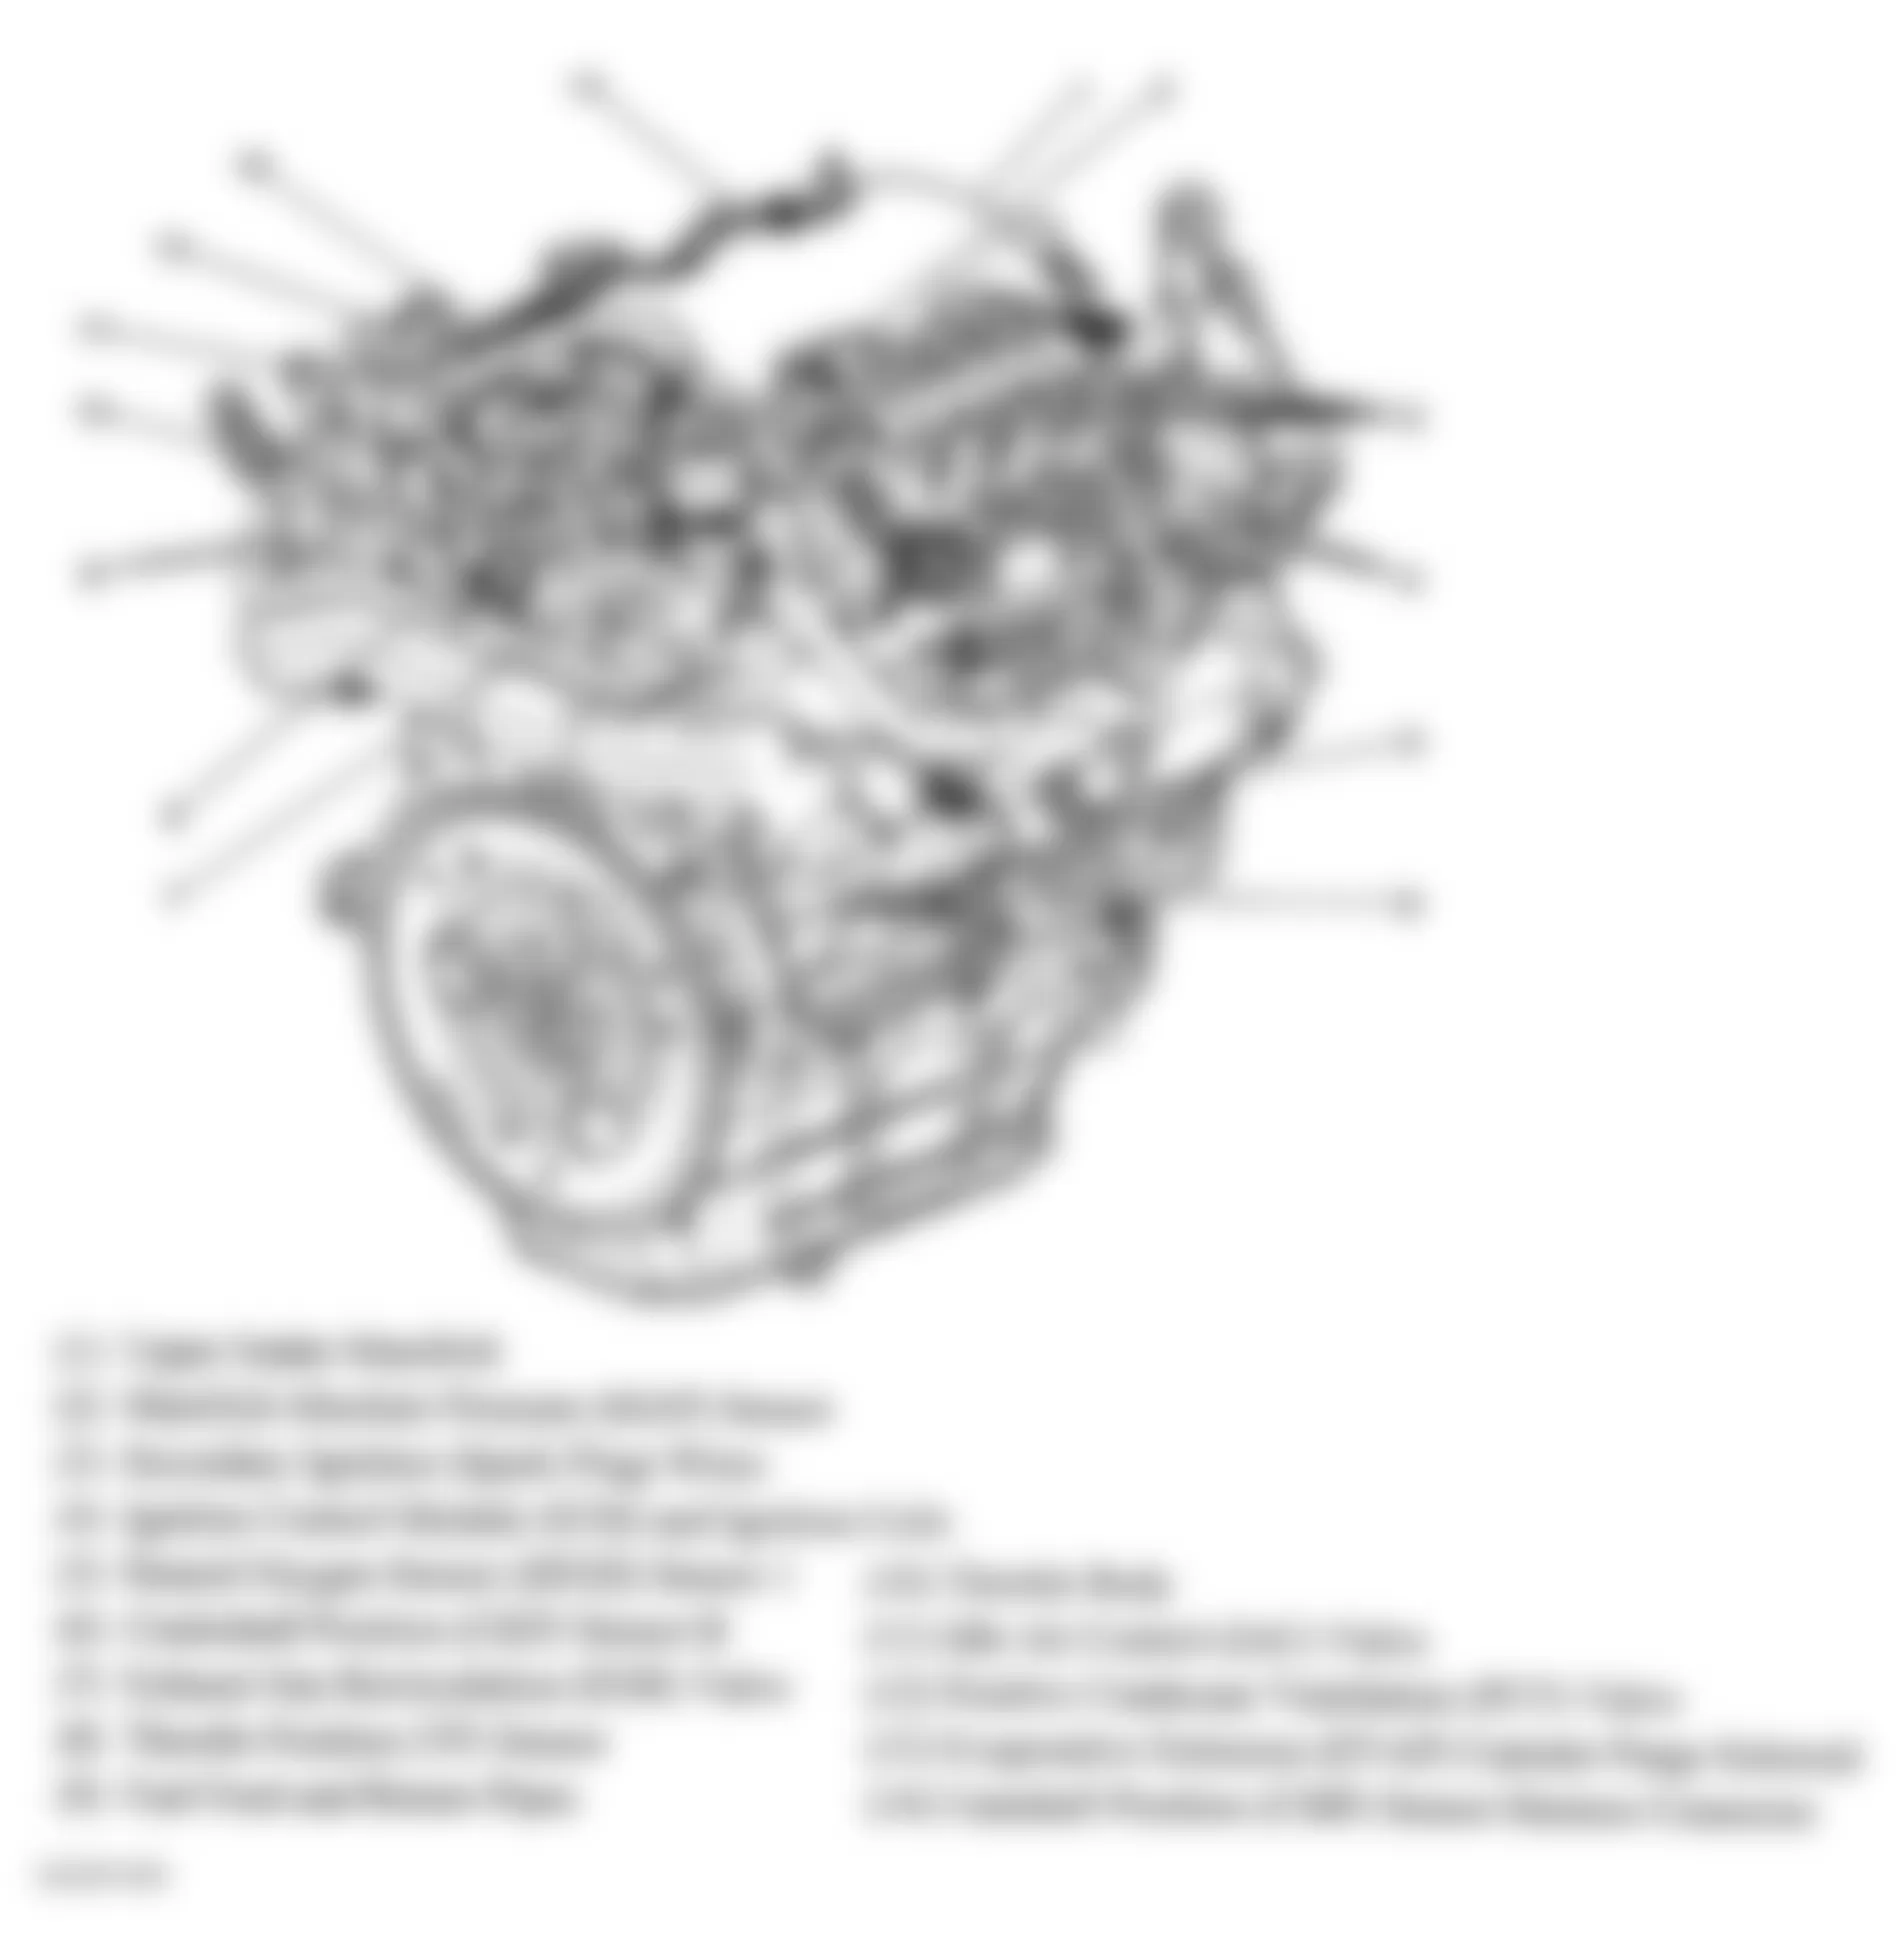 Buick Rendezvous CXL 2006 - Component Locations -  Right Rear Of Engine (3.5L)